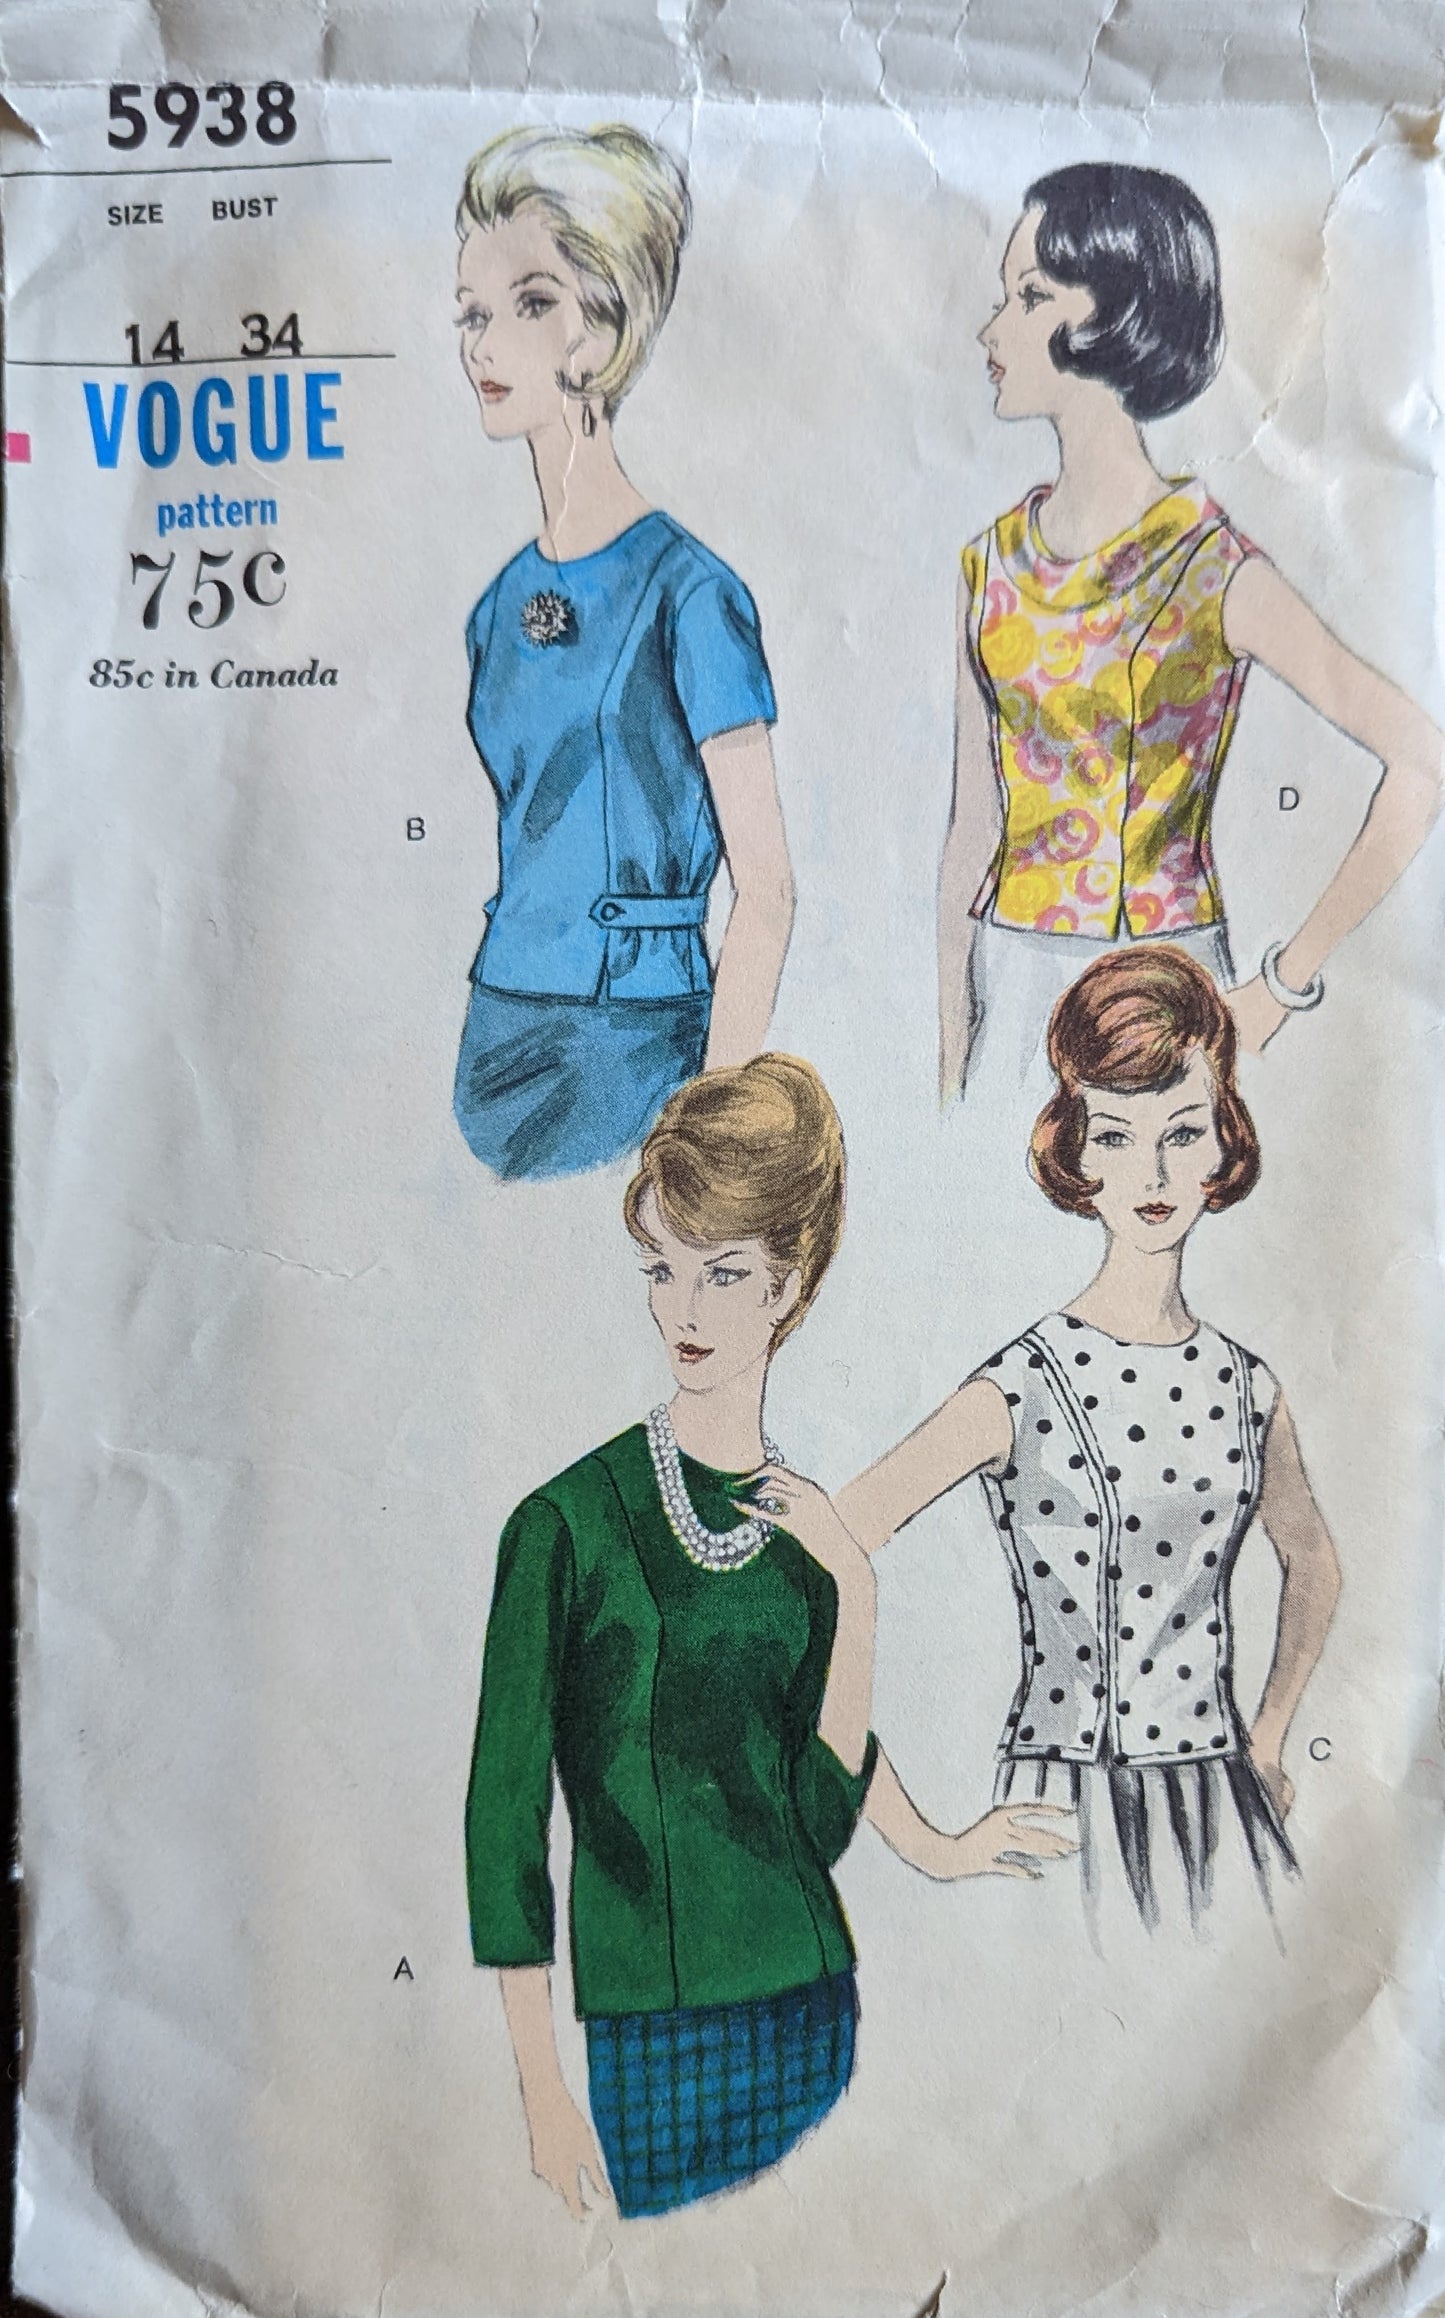 1963 Vogue 5938 Sewing Pattern in Size 14